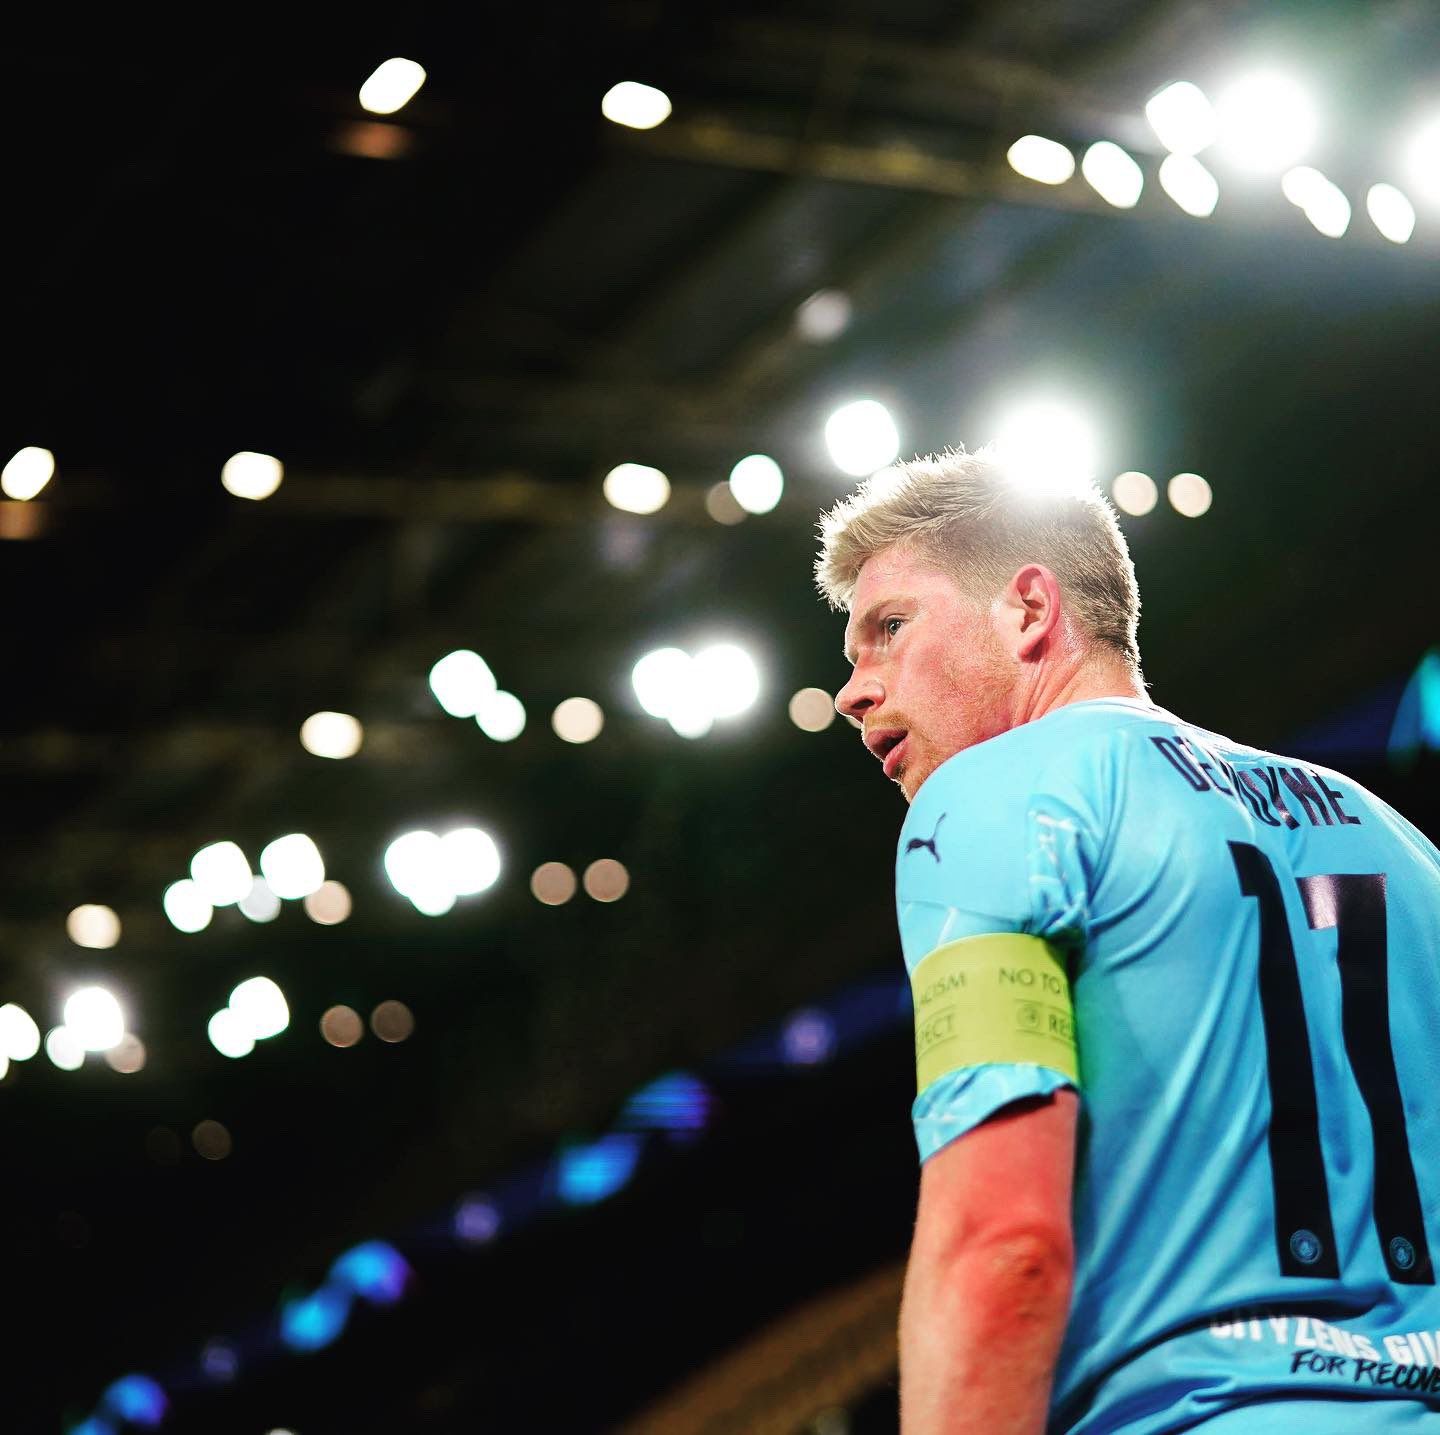 Kevin de Bruyne faces race to make Euro after facial fractures